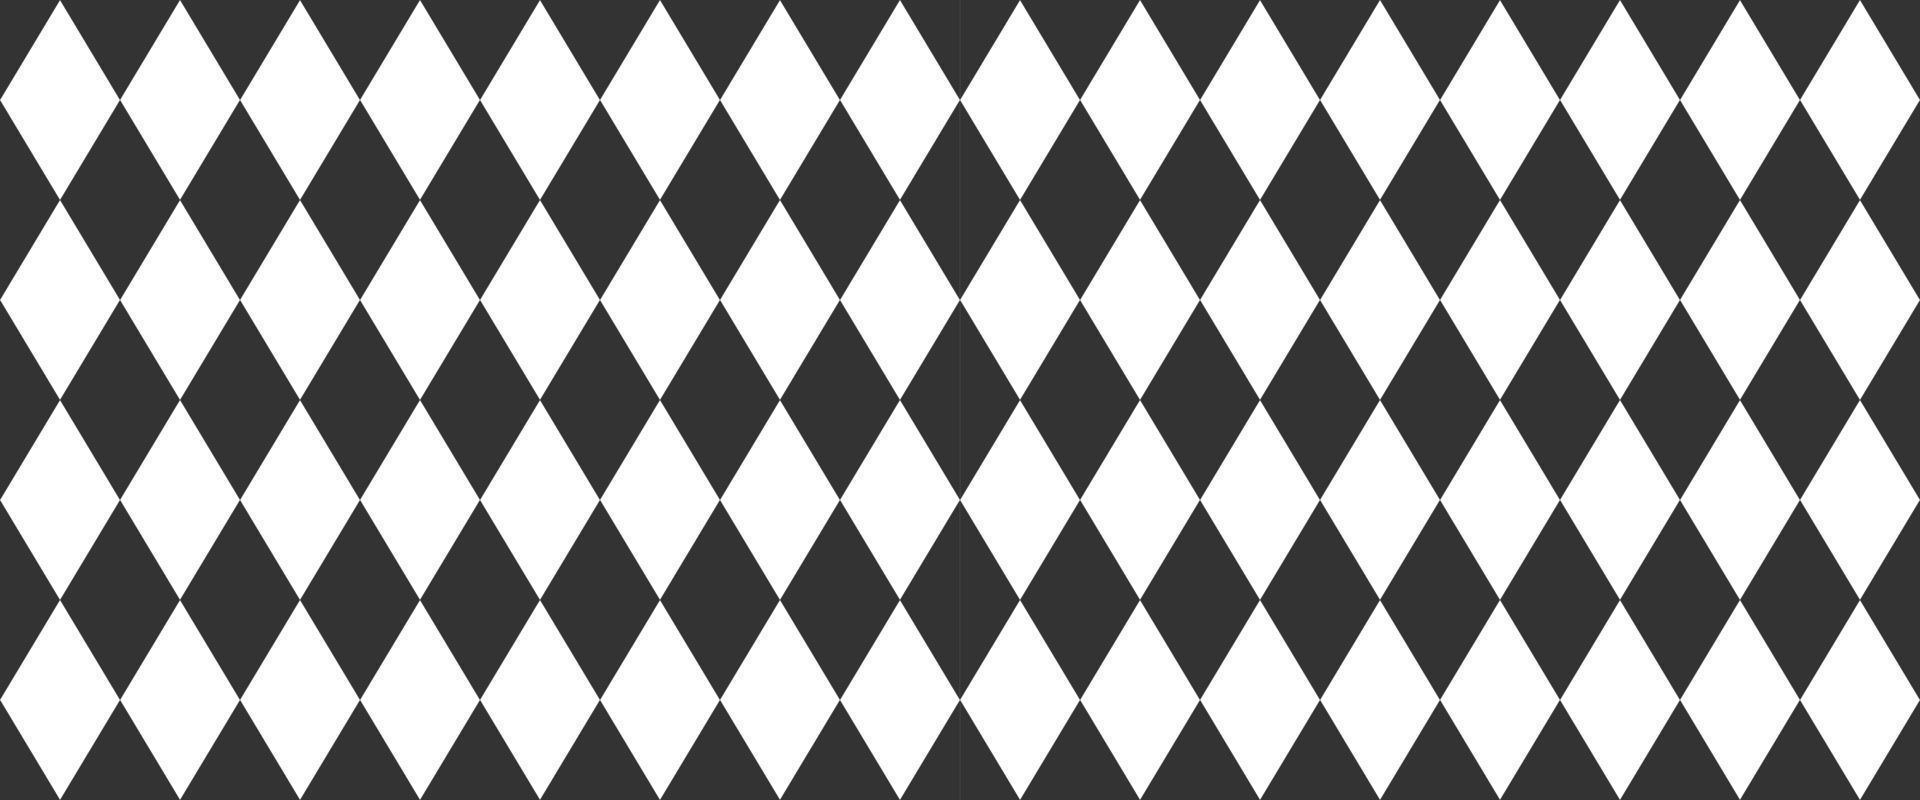 Harlequin seamless pattern. Geometric background with with black and white rhombus. Circus or masquerade ornament vector